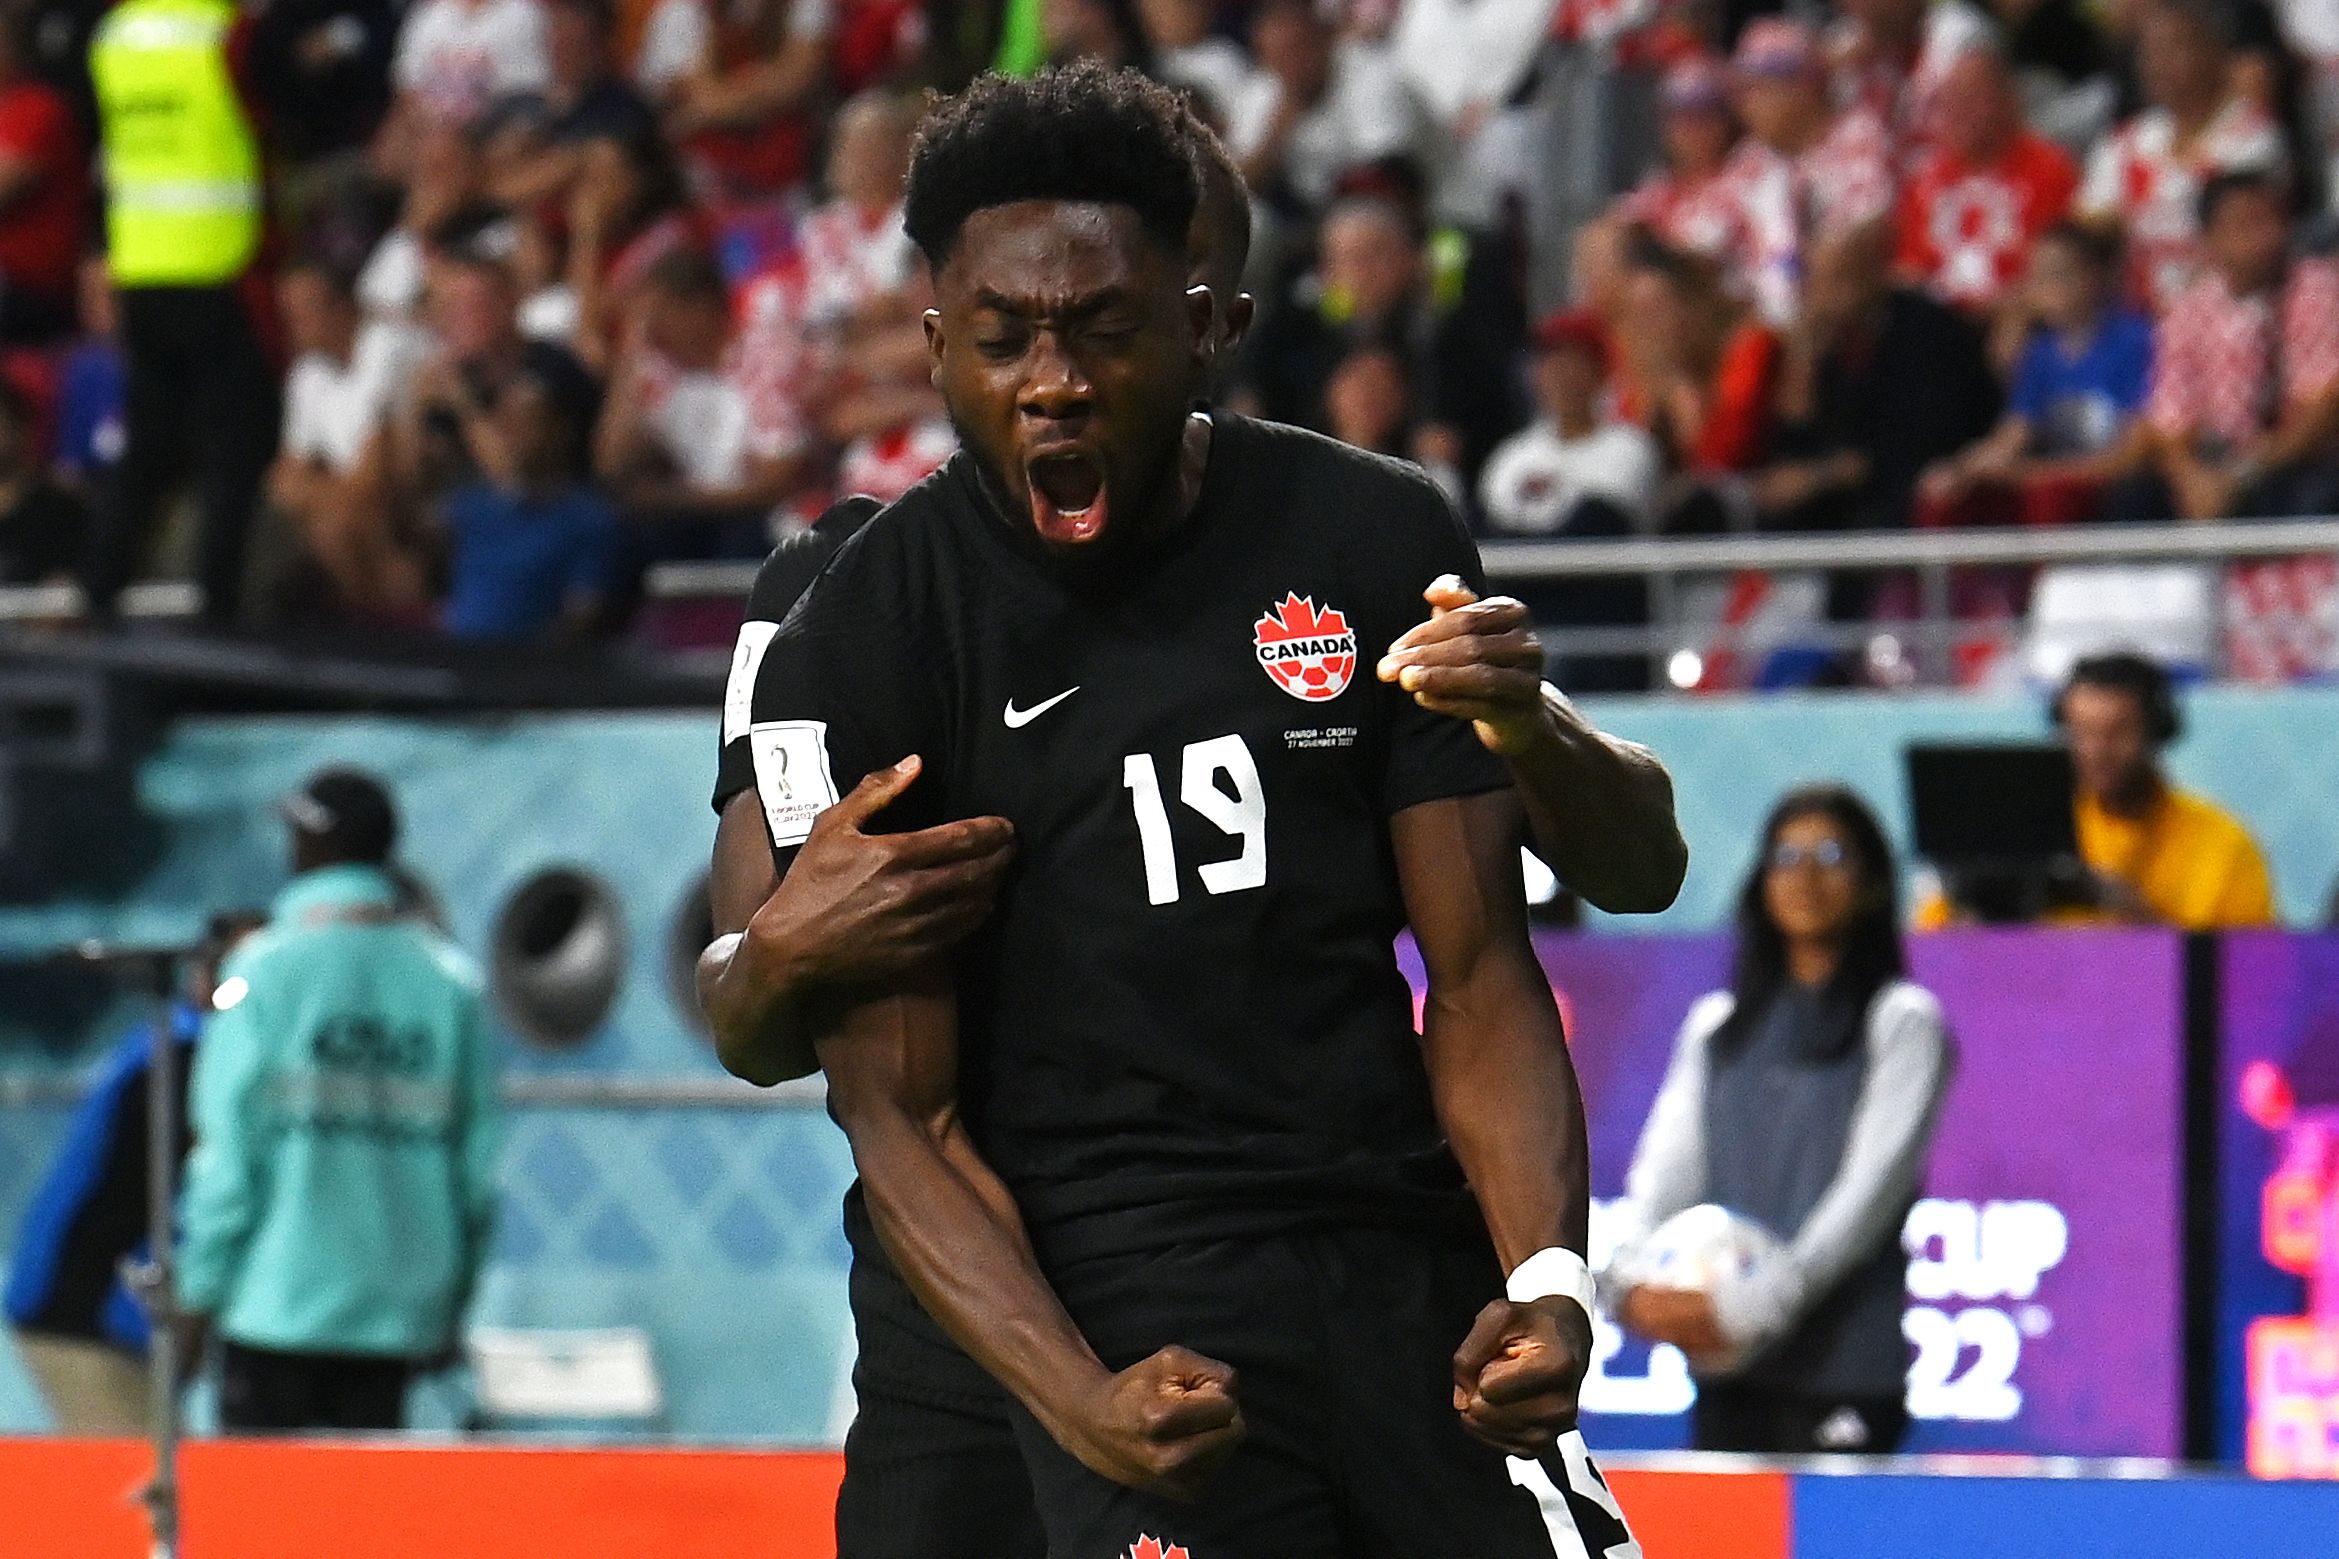 Alphonso Davies celebrates scoring for Canada at the World Cup